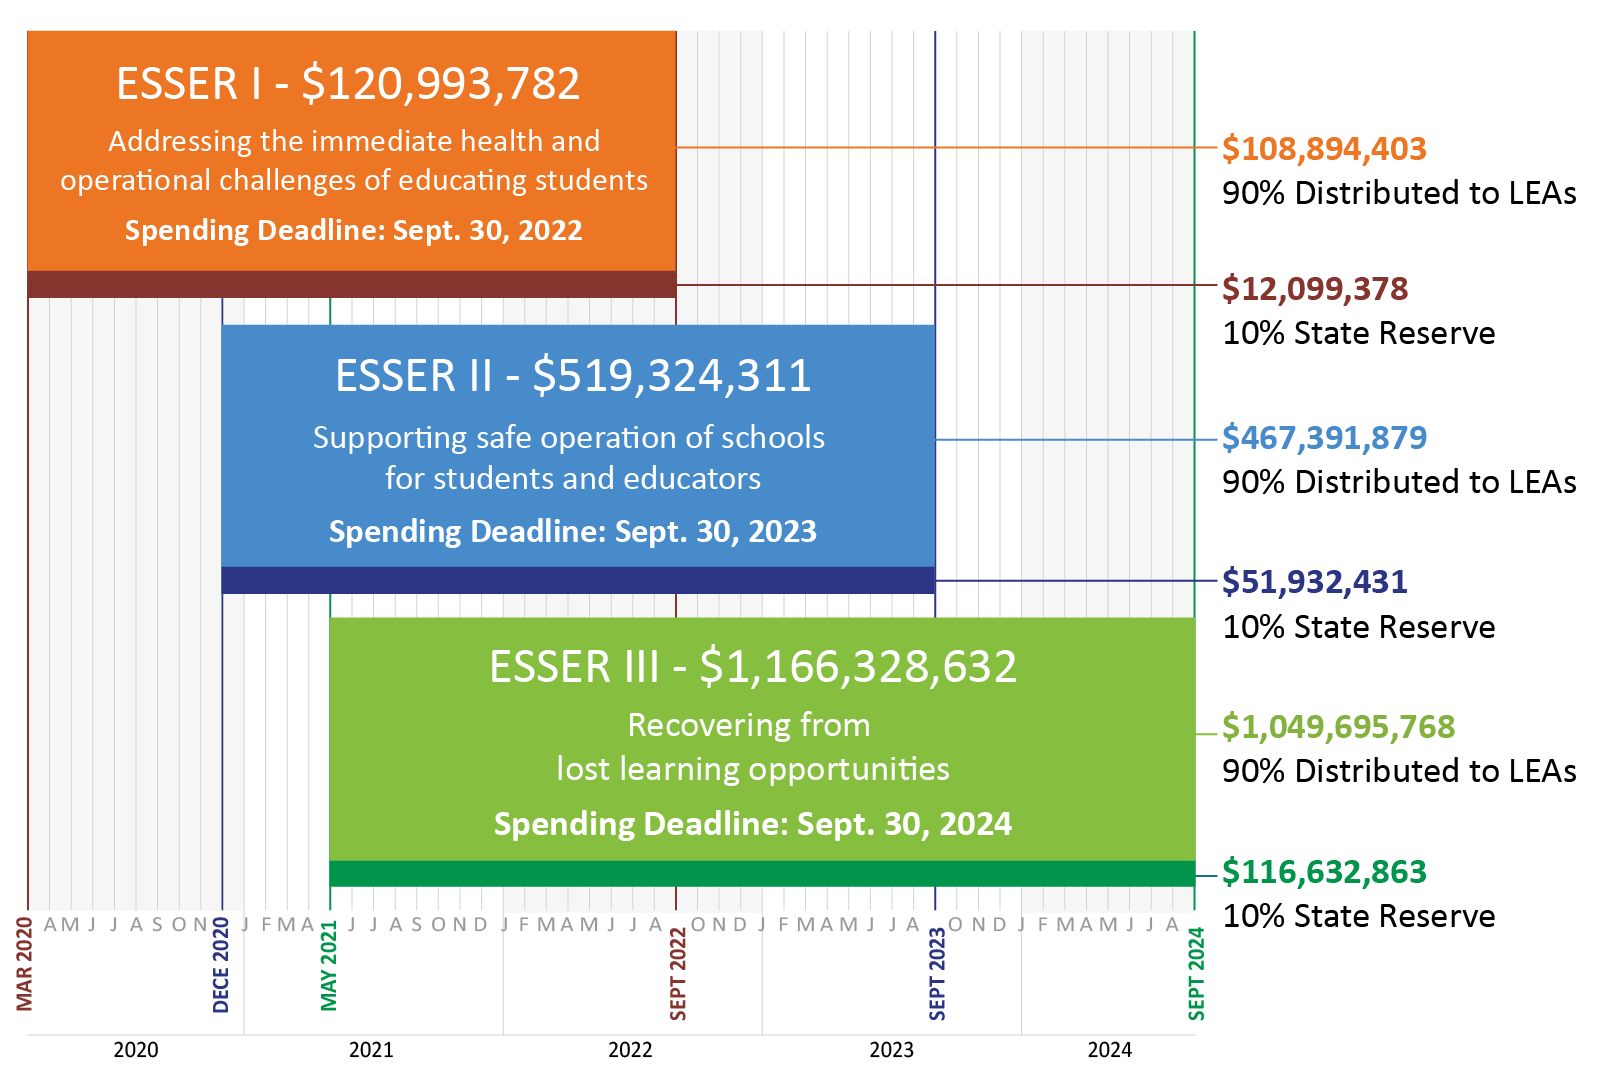 Chart with time frame showing March 2020 to September 2024. ESSER 1, 2 and 3 totals, spending deadlines and distribution ratios between LEAs and State Reserve.